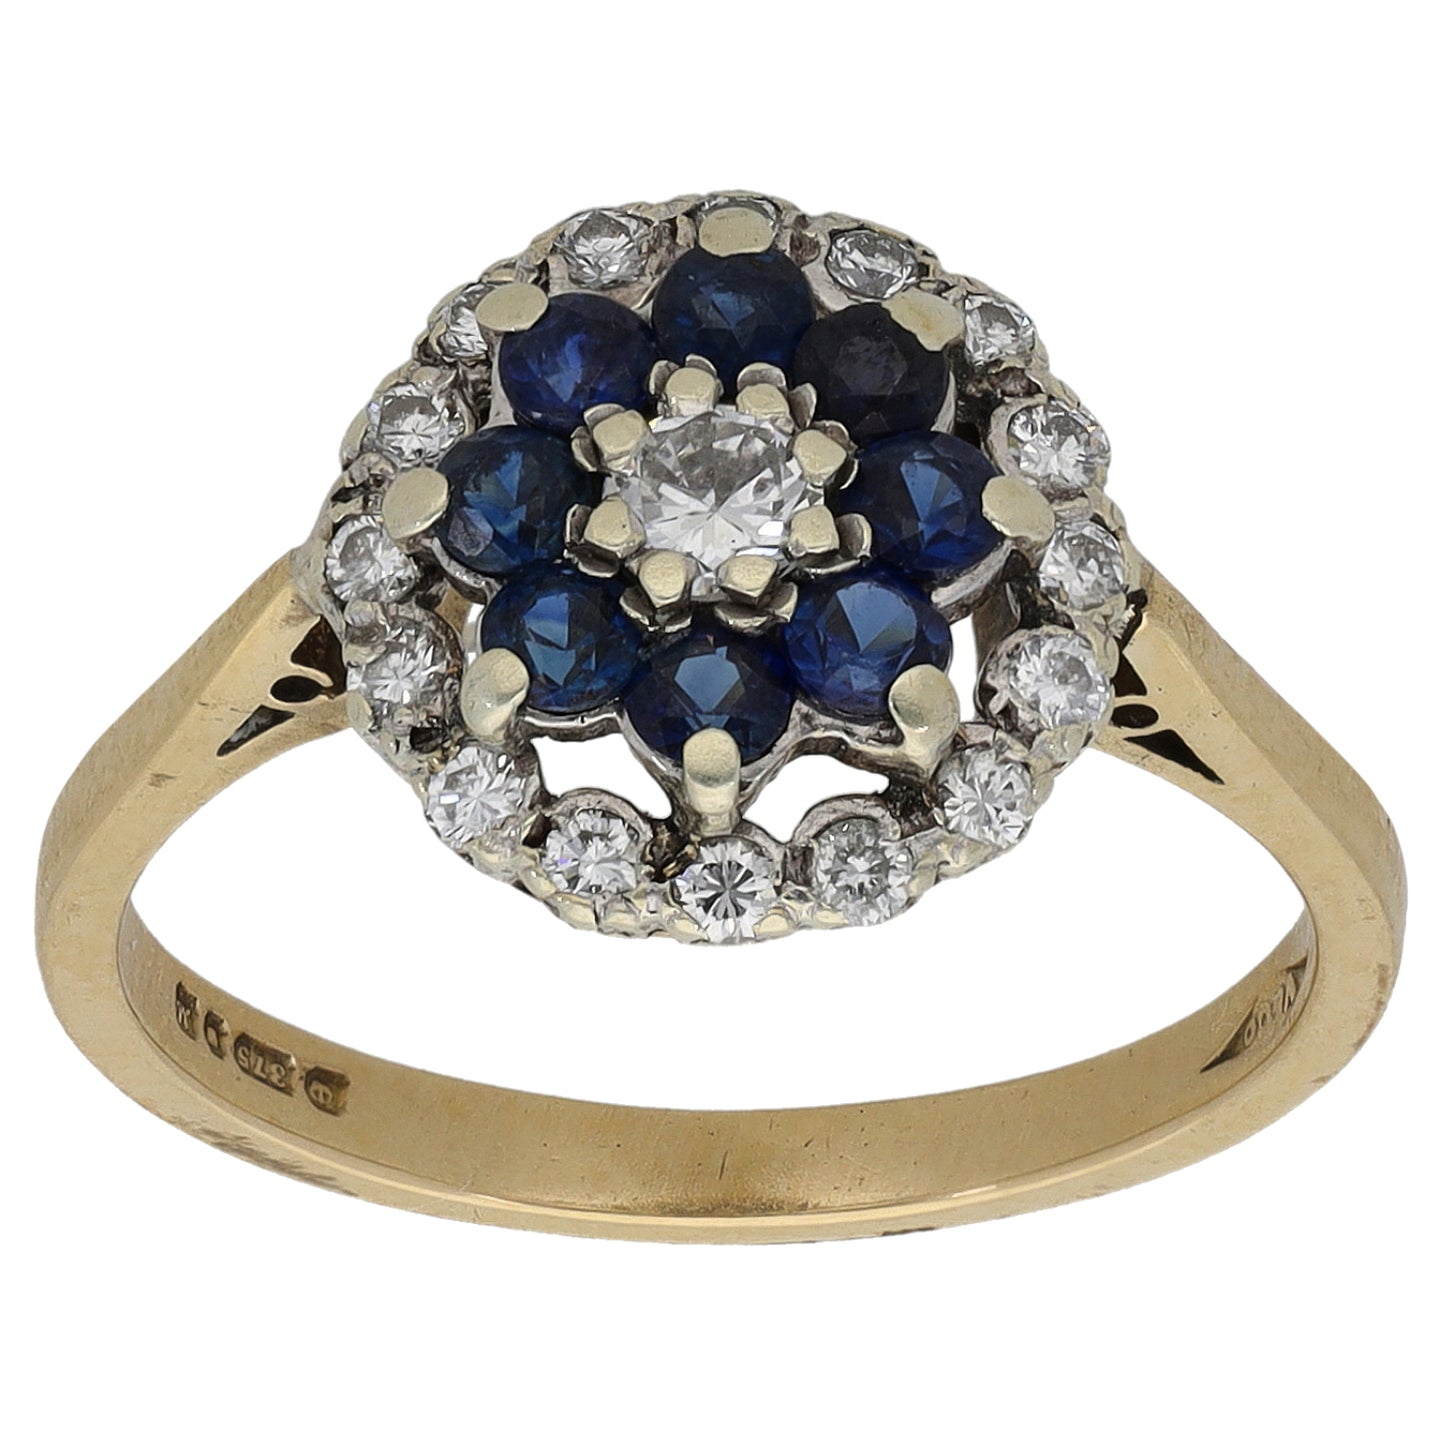 9ct Gold 0.20ct Diamond & Sapphire Dress/Cocktail Ring Size L – H&T